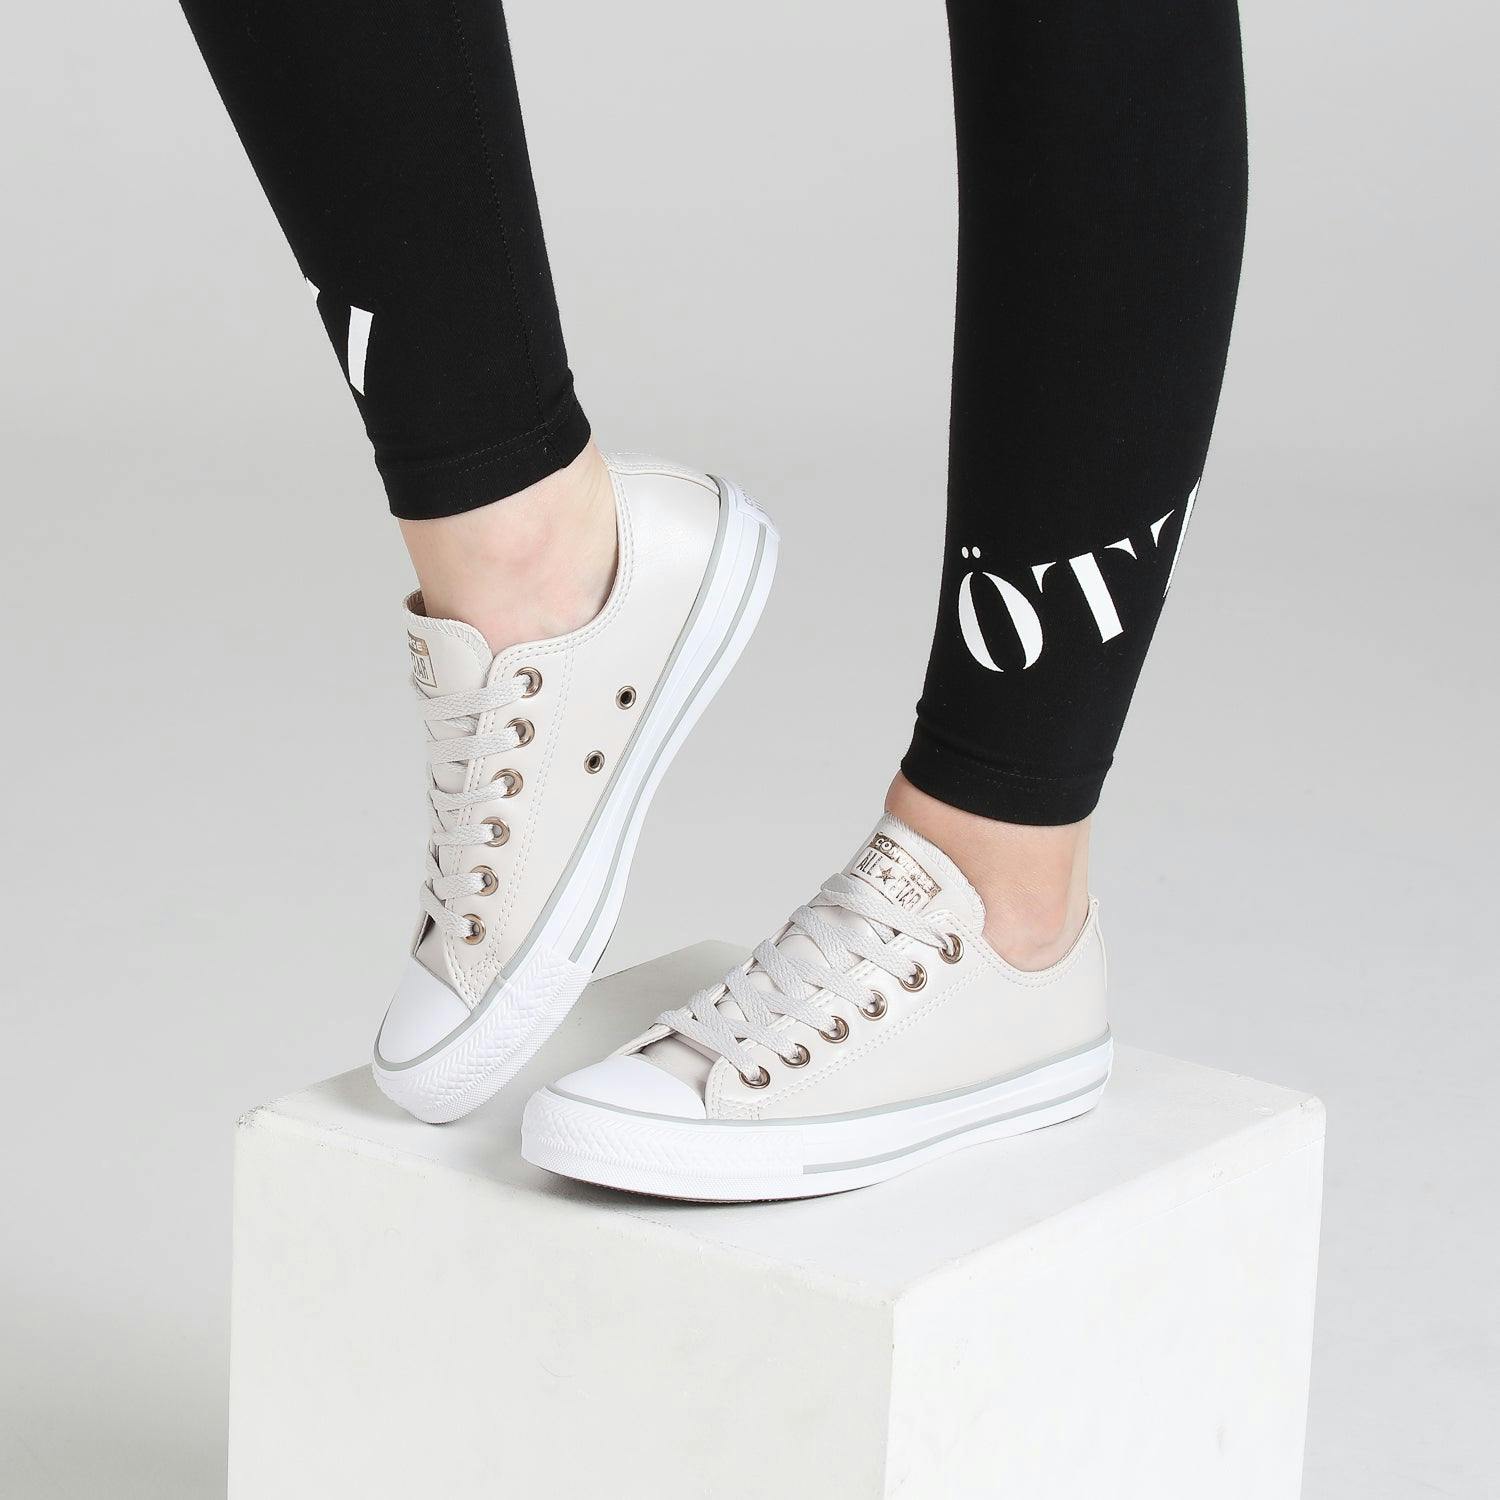 Converse Chuck Taylor Craft SL Low Beige/White | Culture Kings NZ